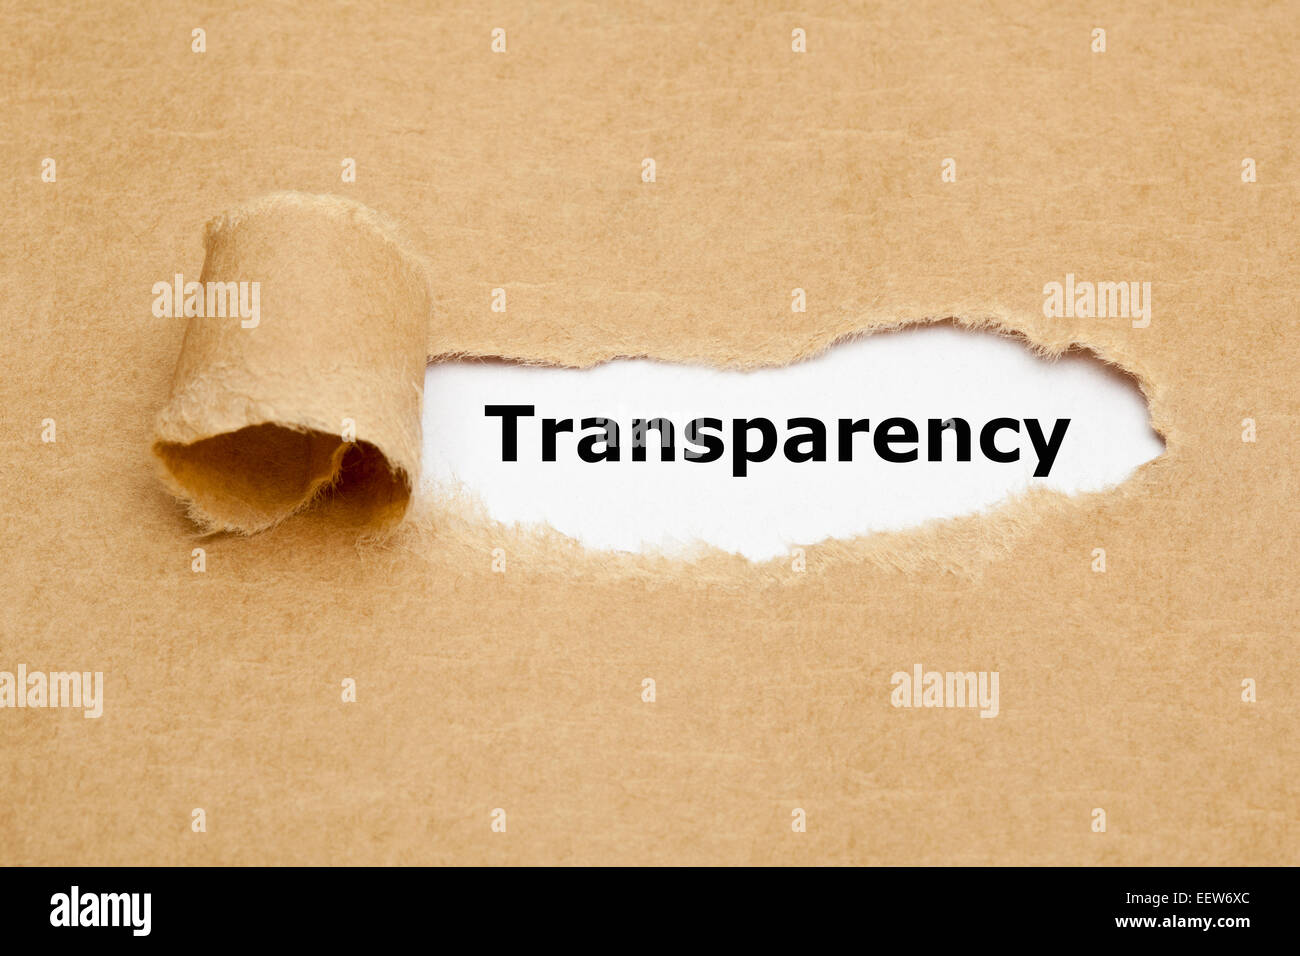 The word Transparency appearing behind torn brown paper. Stock Photo